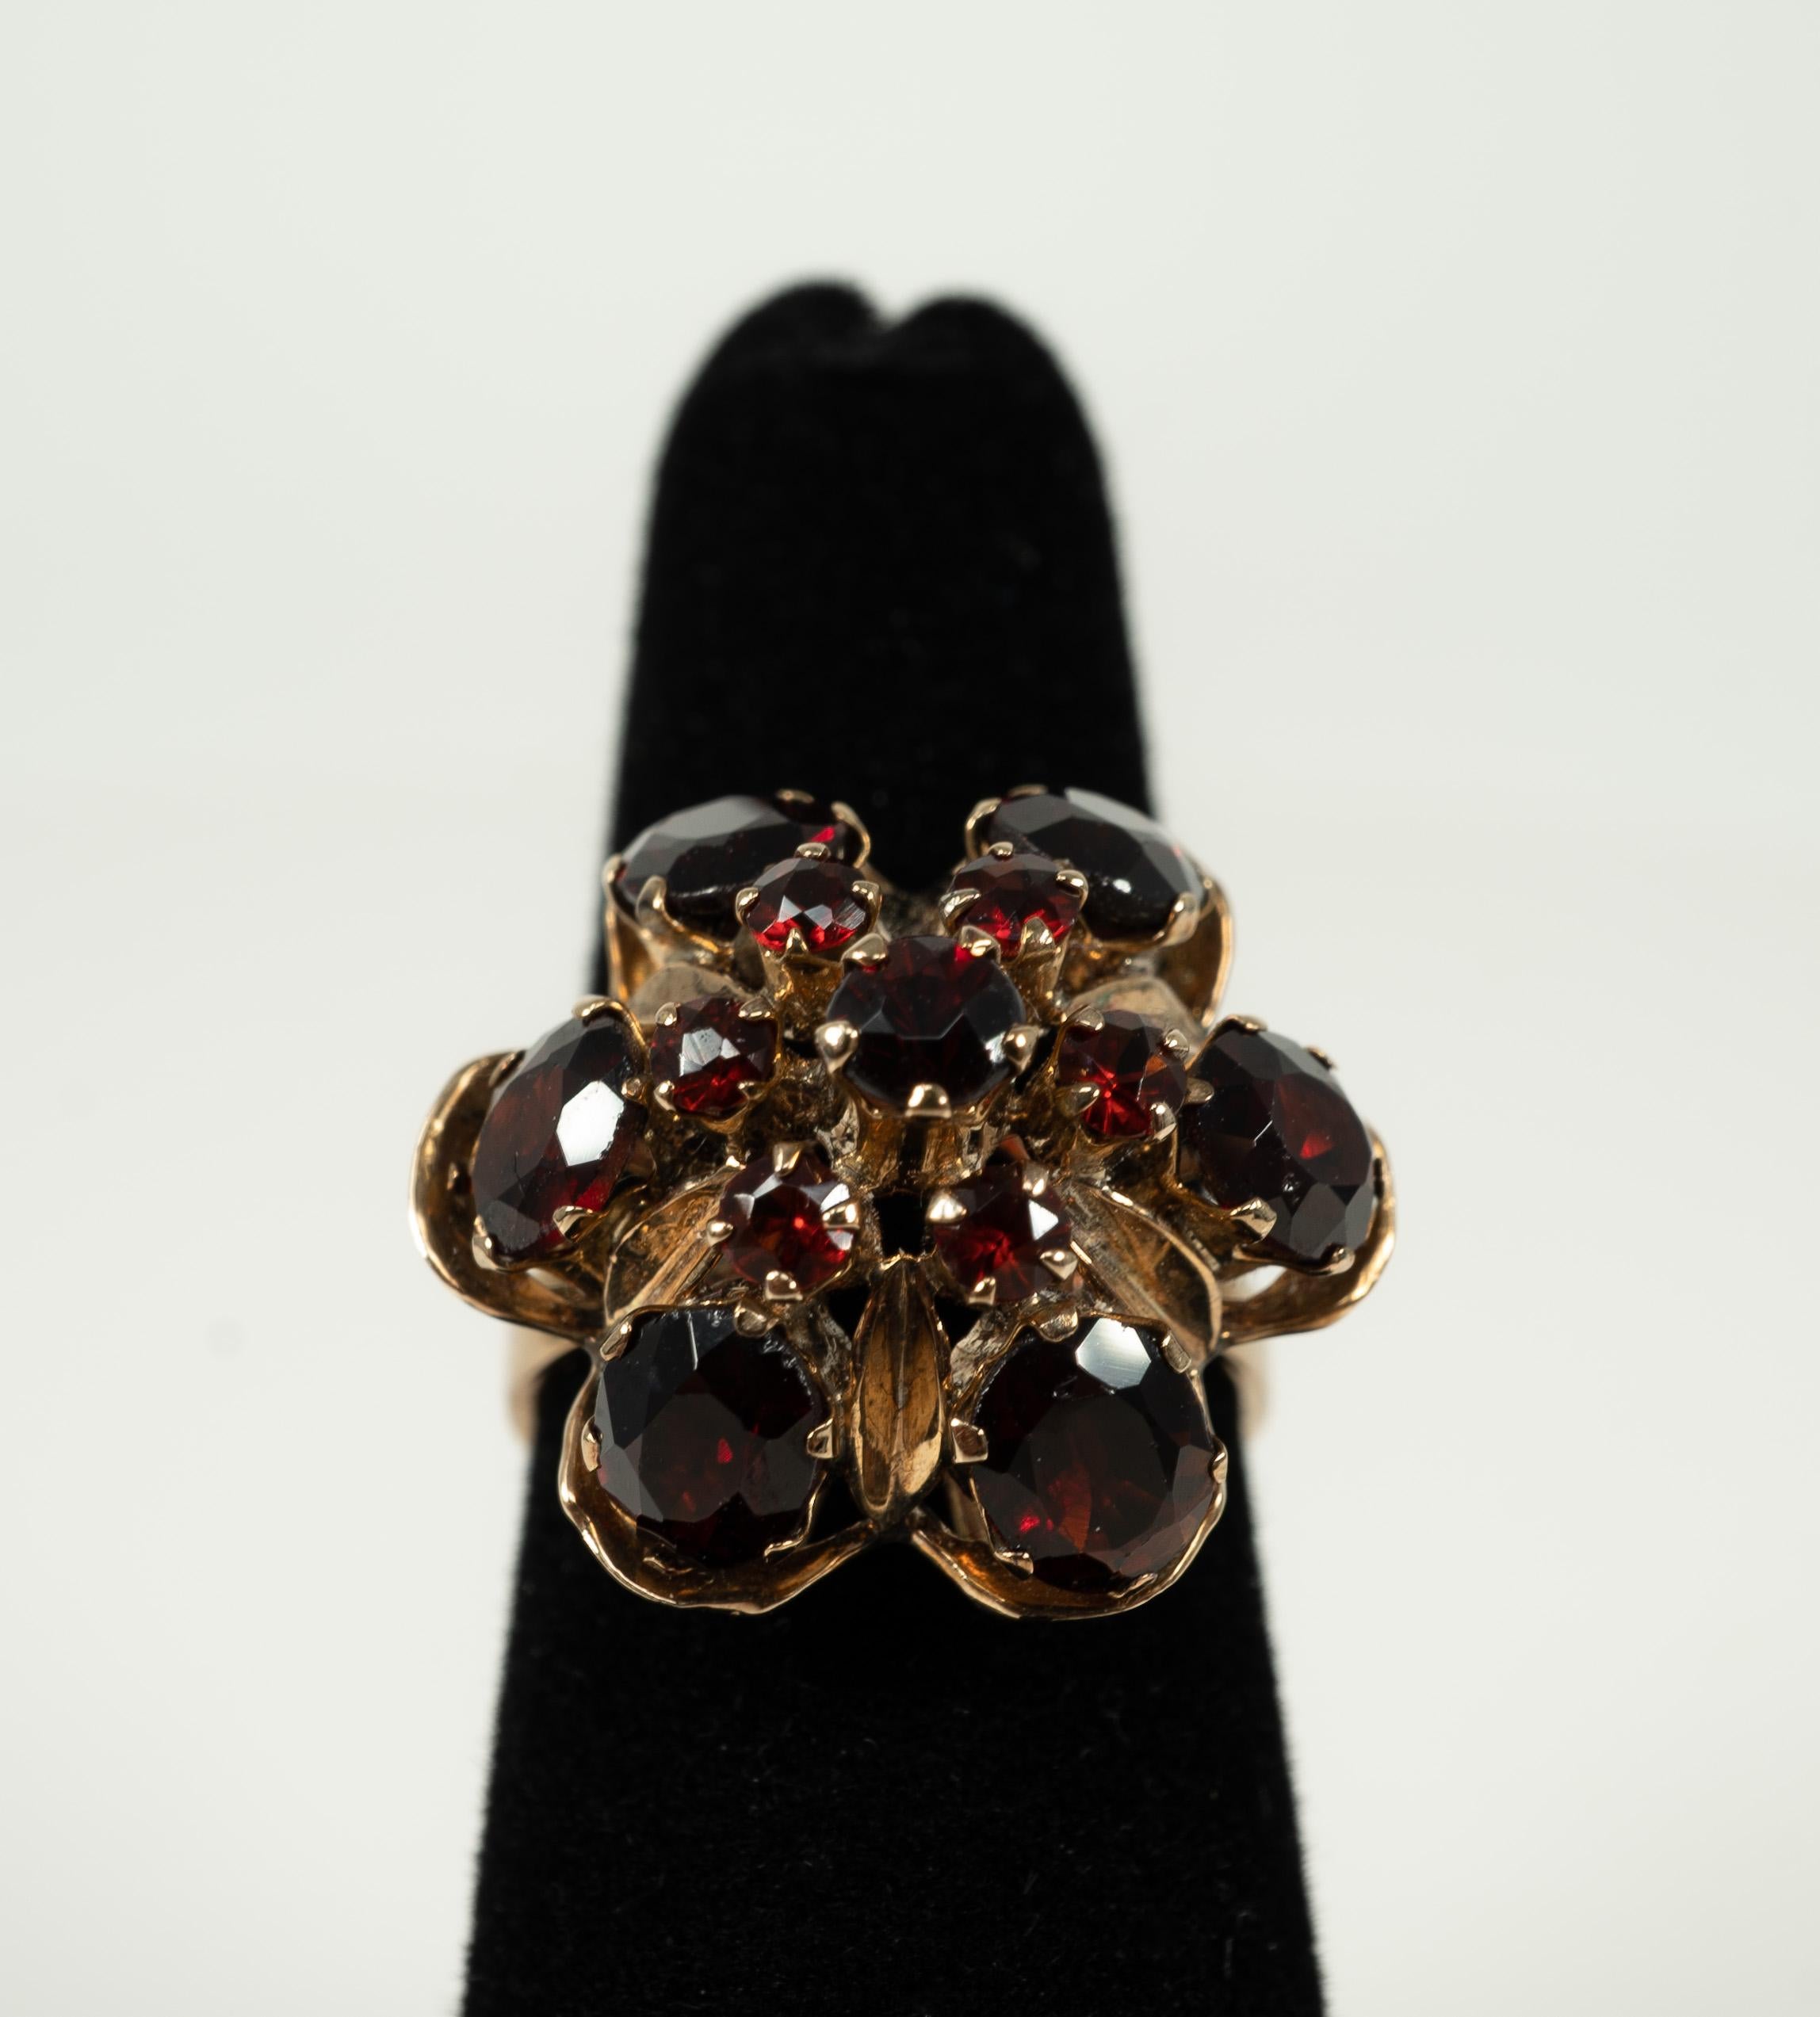 This fun harem ring is in 14 karat yellow gold and supports lovely garnets!